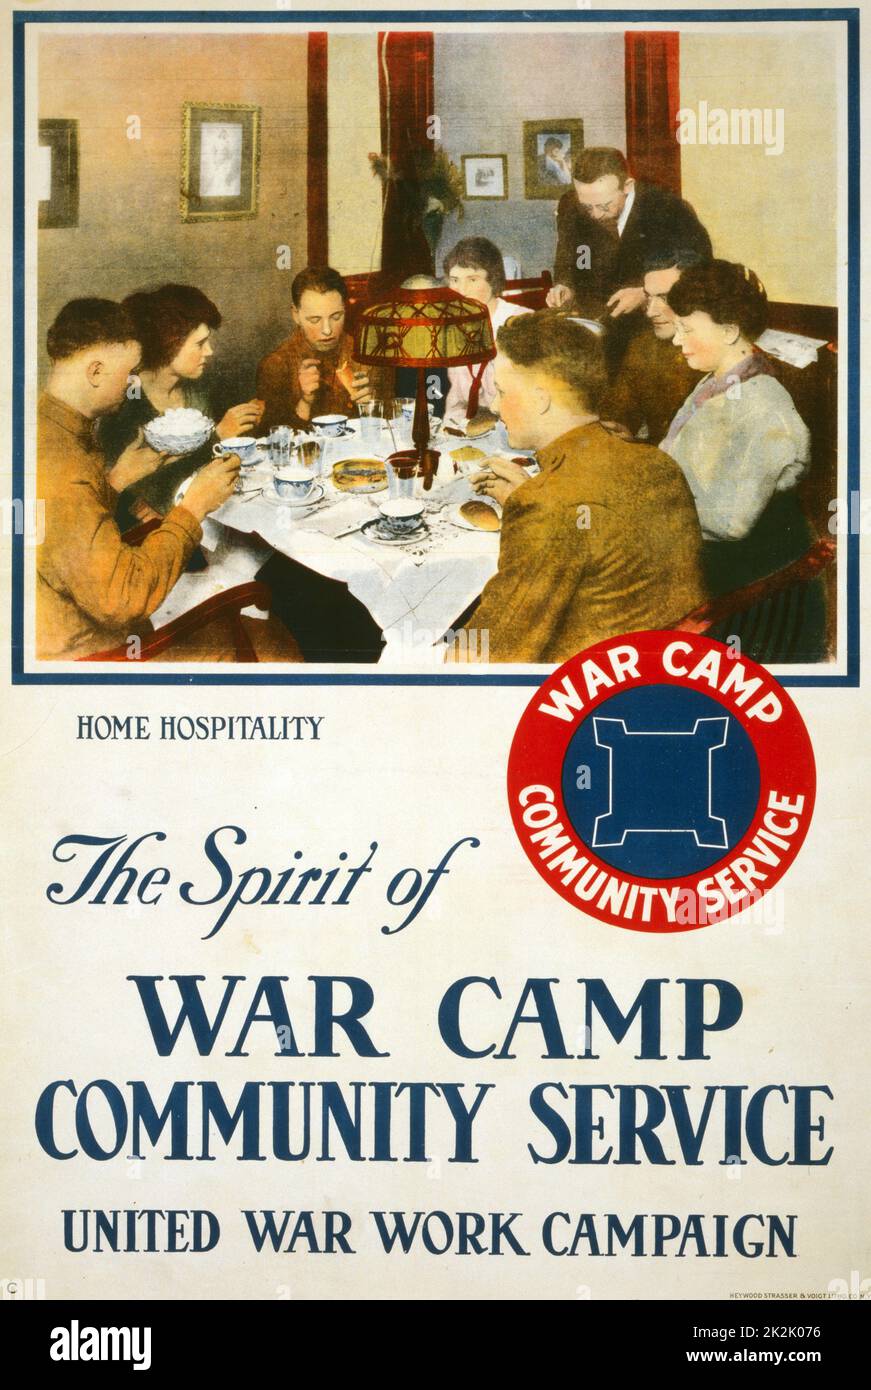 Title: The spirit of war camp community service, United War Work Campaign / Heywood Strasser & Voigt Litho. Co. N.Y.  1918 Poster showing a group of servicemen having dinner in a home. Stock Photo